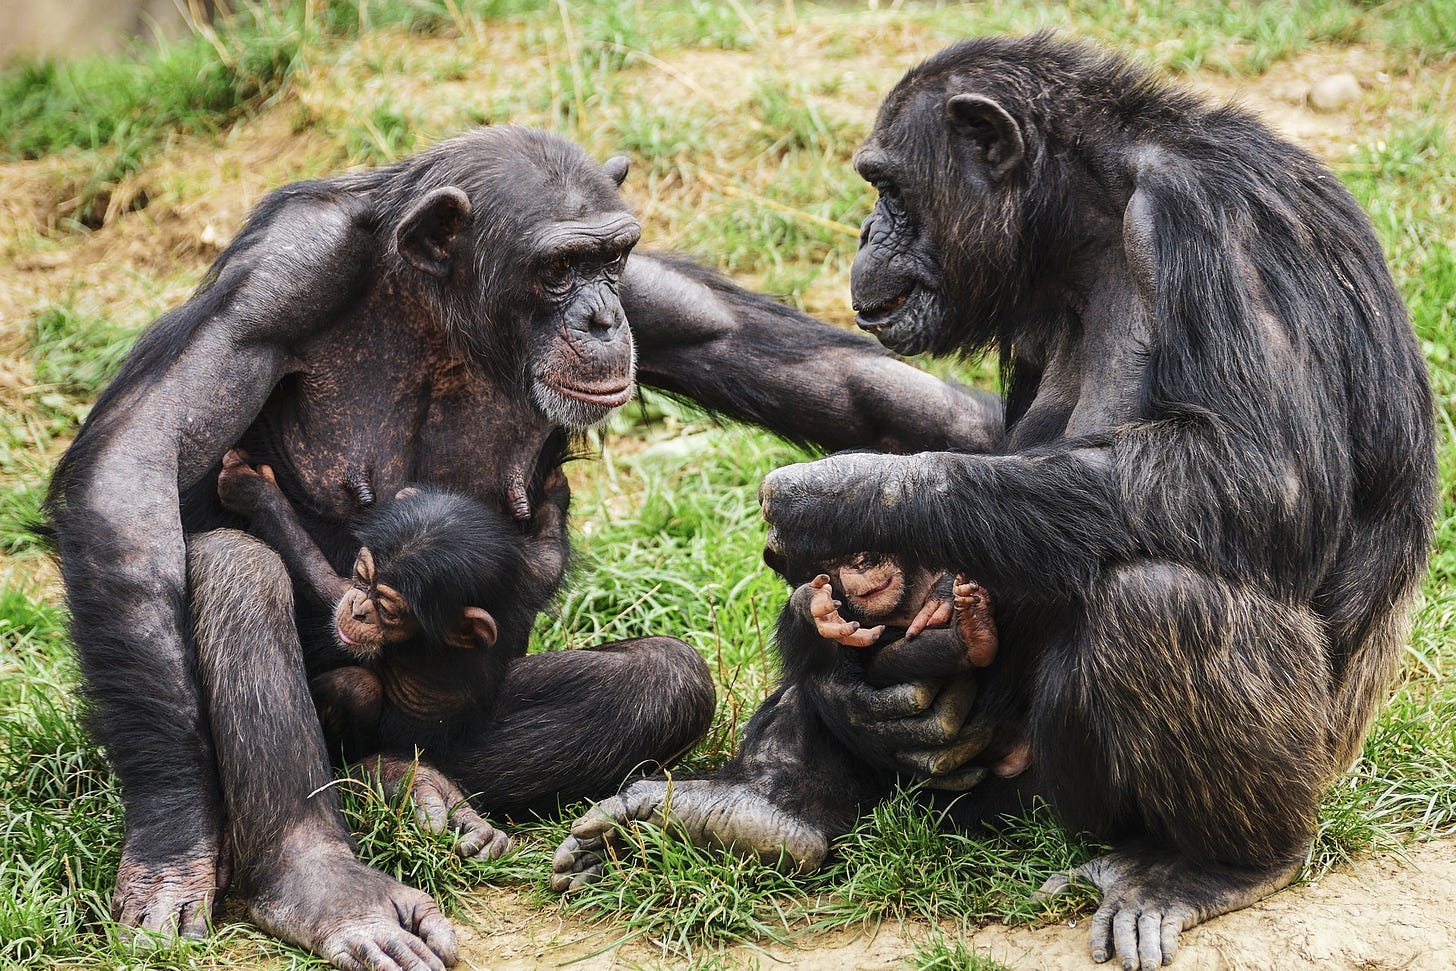 A pair of female chimpanzees, each with a baby, sit facing one another in the grass. The baby of the chimp on the left is clinging to its mother’s torso; its mother is reaching out to touch the mother on the right, who is cradling her baby with one hand.